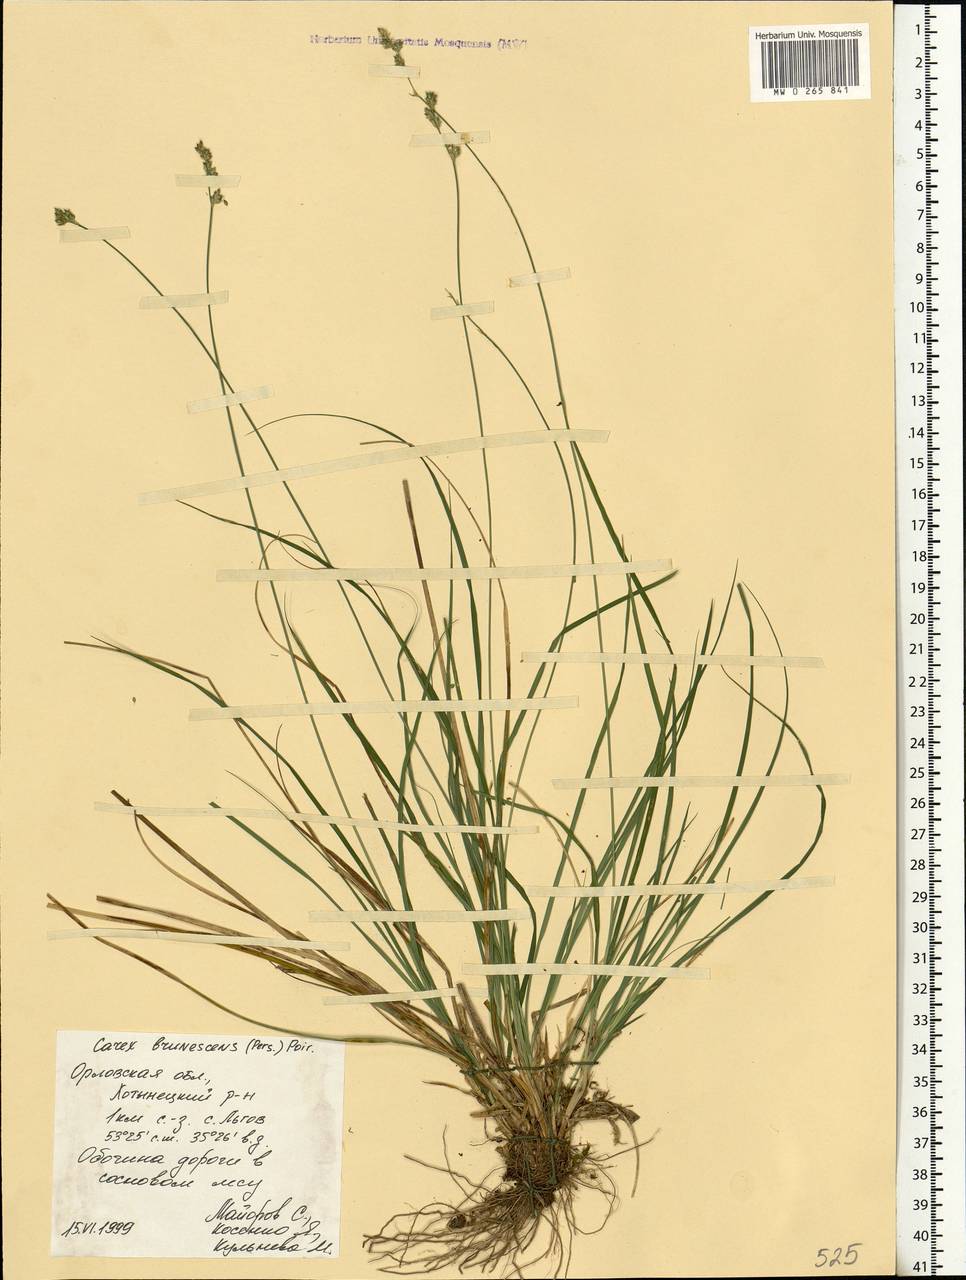 Carex brunnescens (Pers.) Poir., Eastern Europe, Central forest-and-steppe region (E6) (Russia)